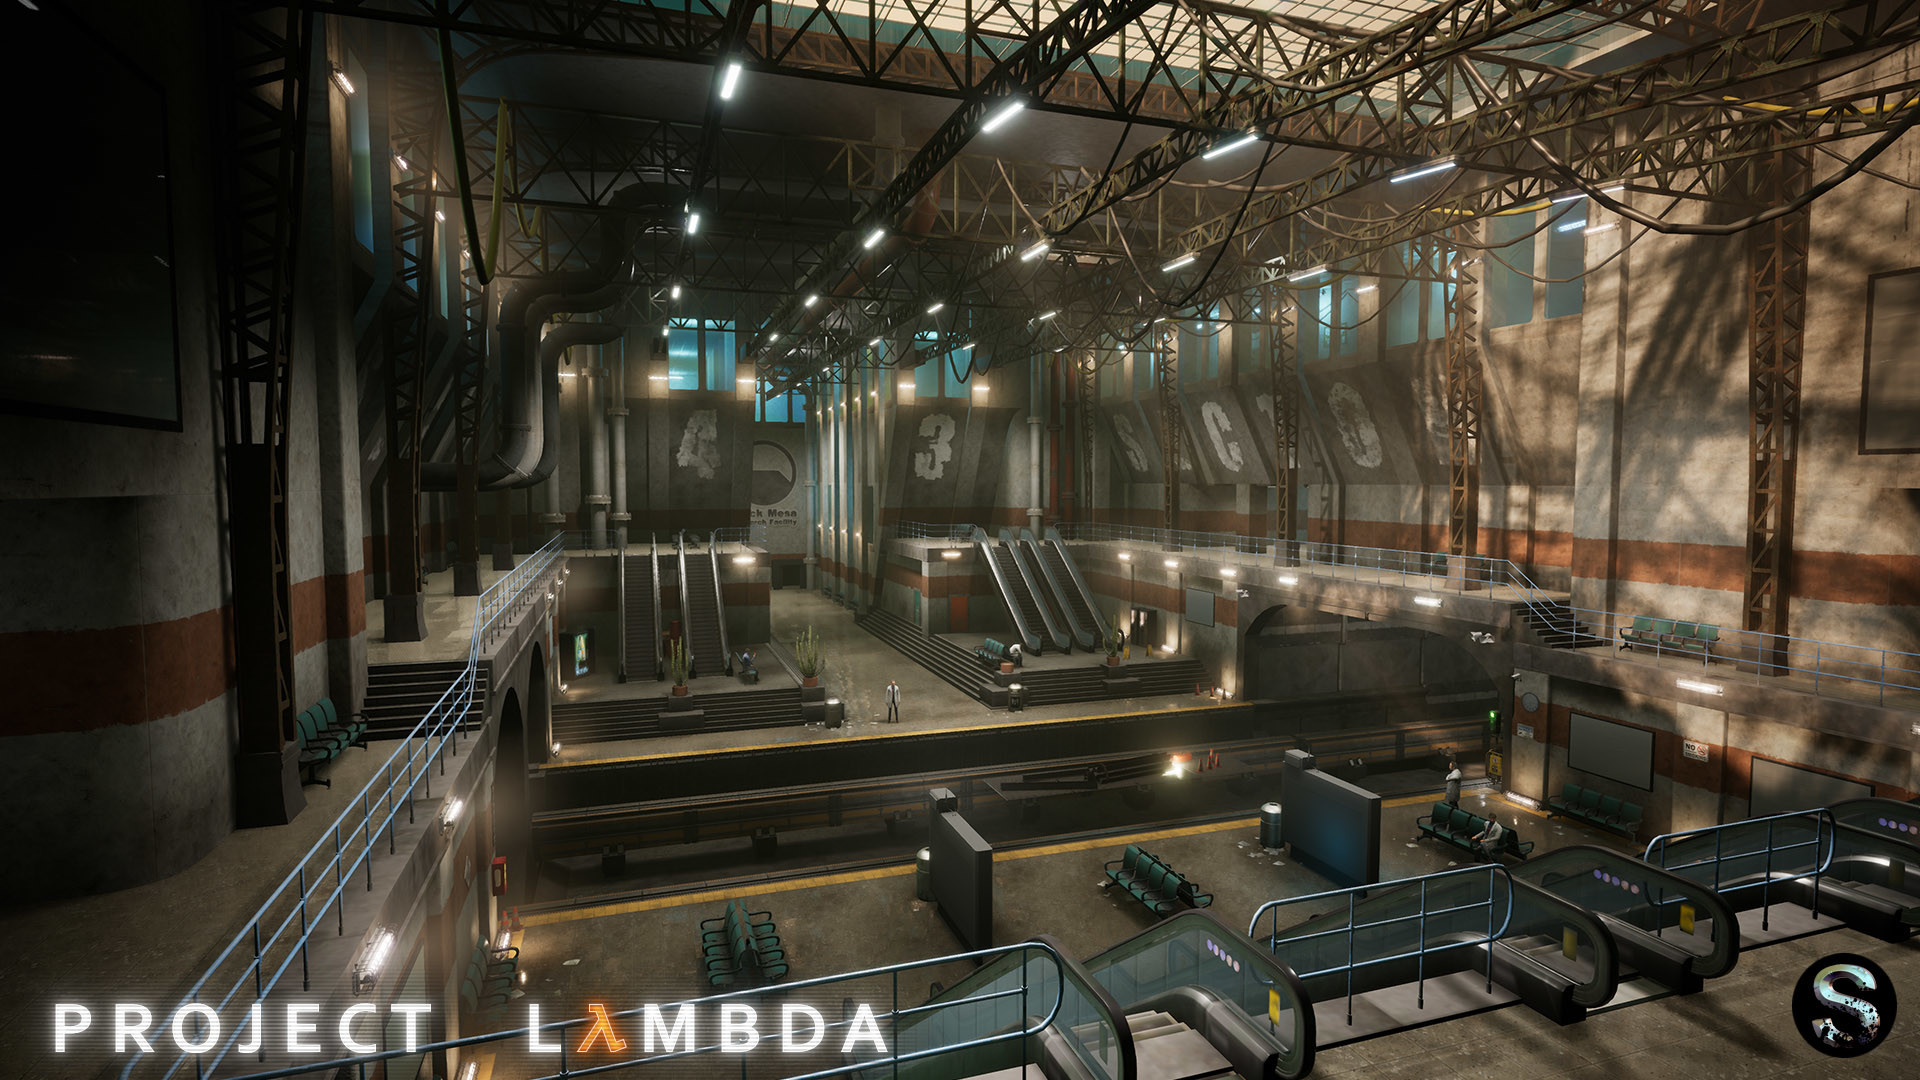 Above All, We Wanted To Make A Breakthrough In Visualization - Half Life Project Lambda , HD Wallpaper & Backgrounds